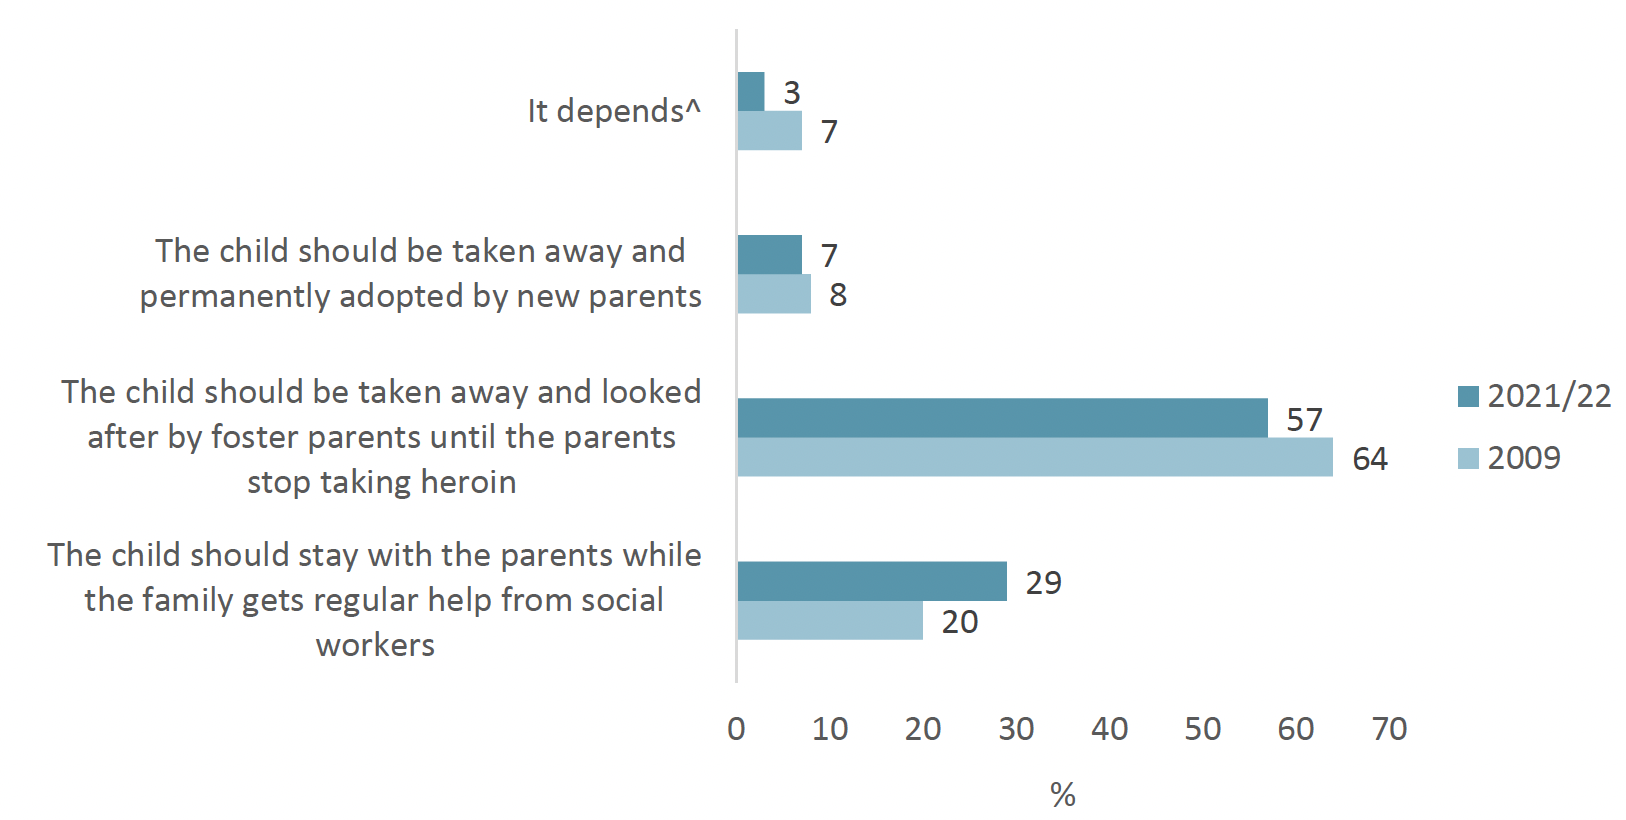 Bar graph showing changes in attitudes towards the appropriate approach to take in relation to a child’s care where they are affected by a parent’s heroin use between 2009 and 2021/22. Across both waves of the survey, a majority of respondents (57% and 64% respectively) felt that temporary foster care was the most appropriate response in such circumstances. 